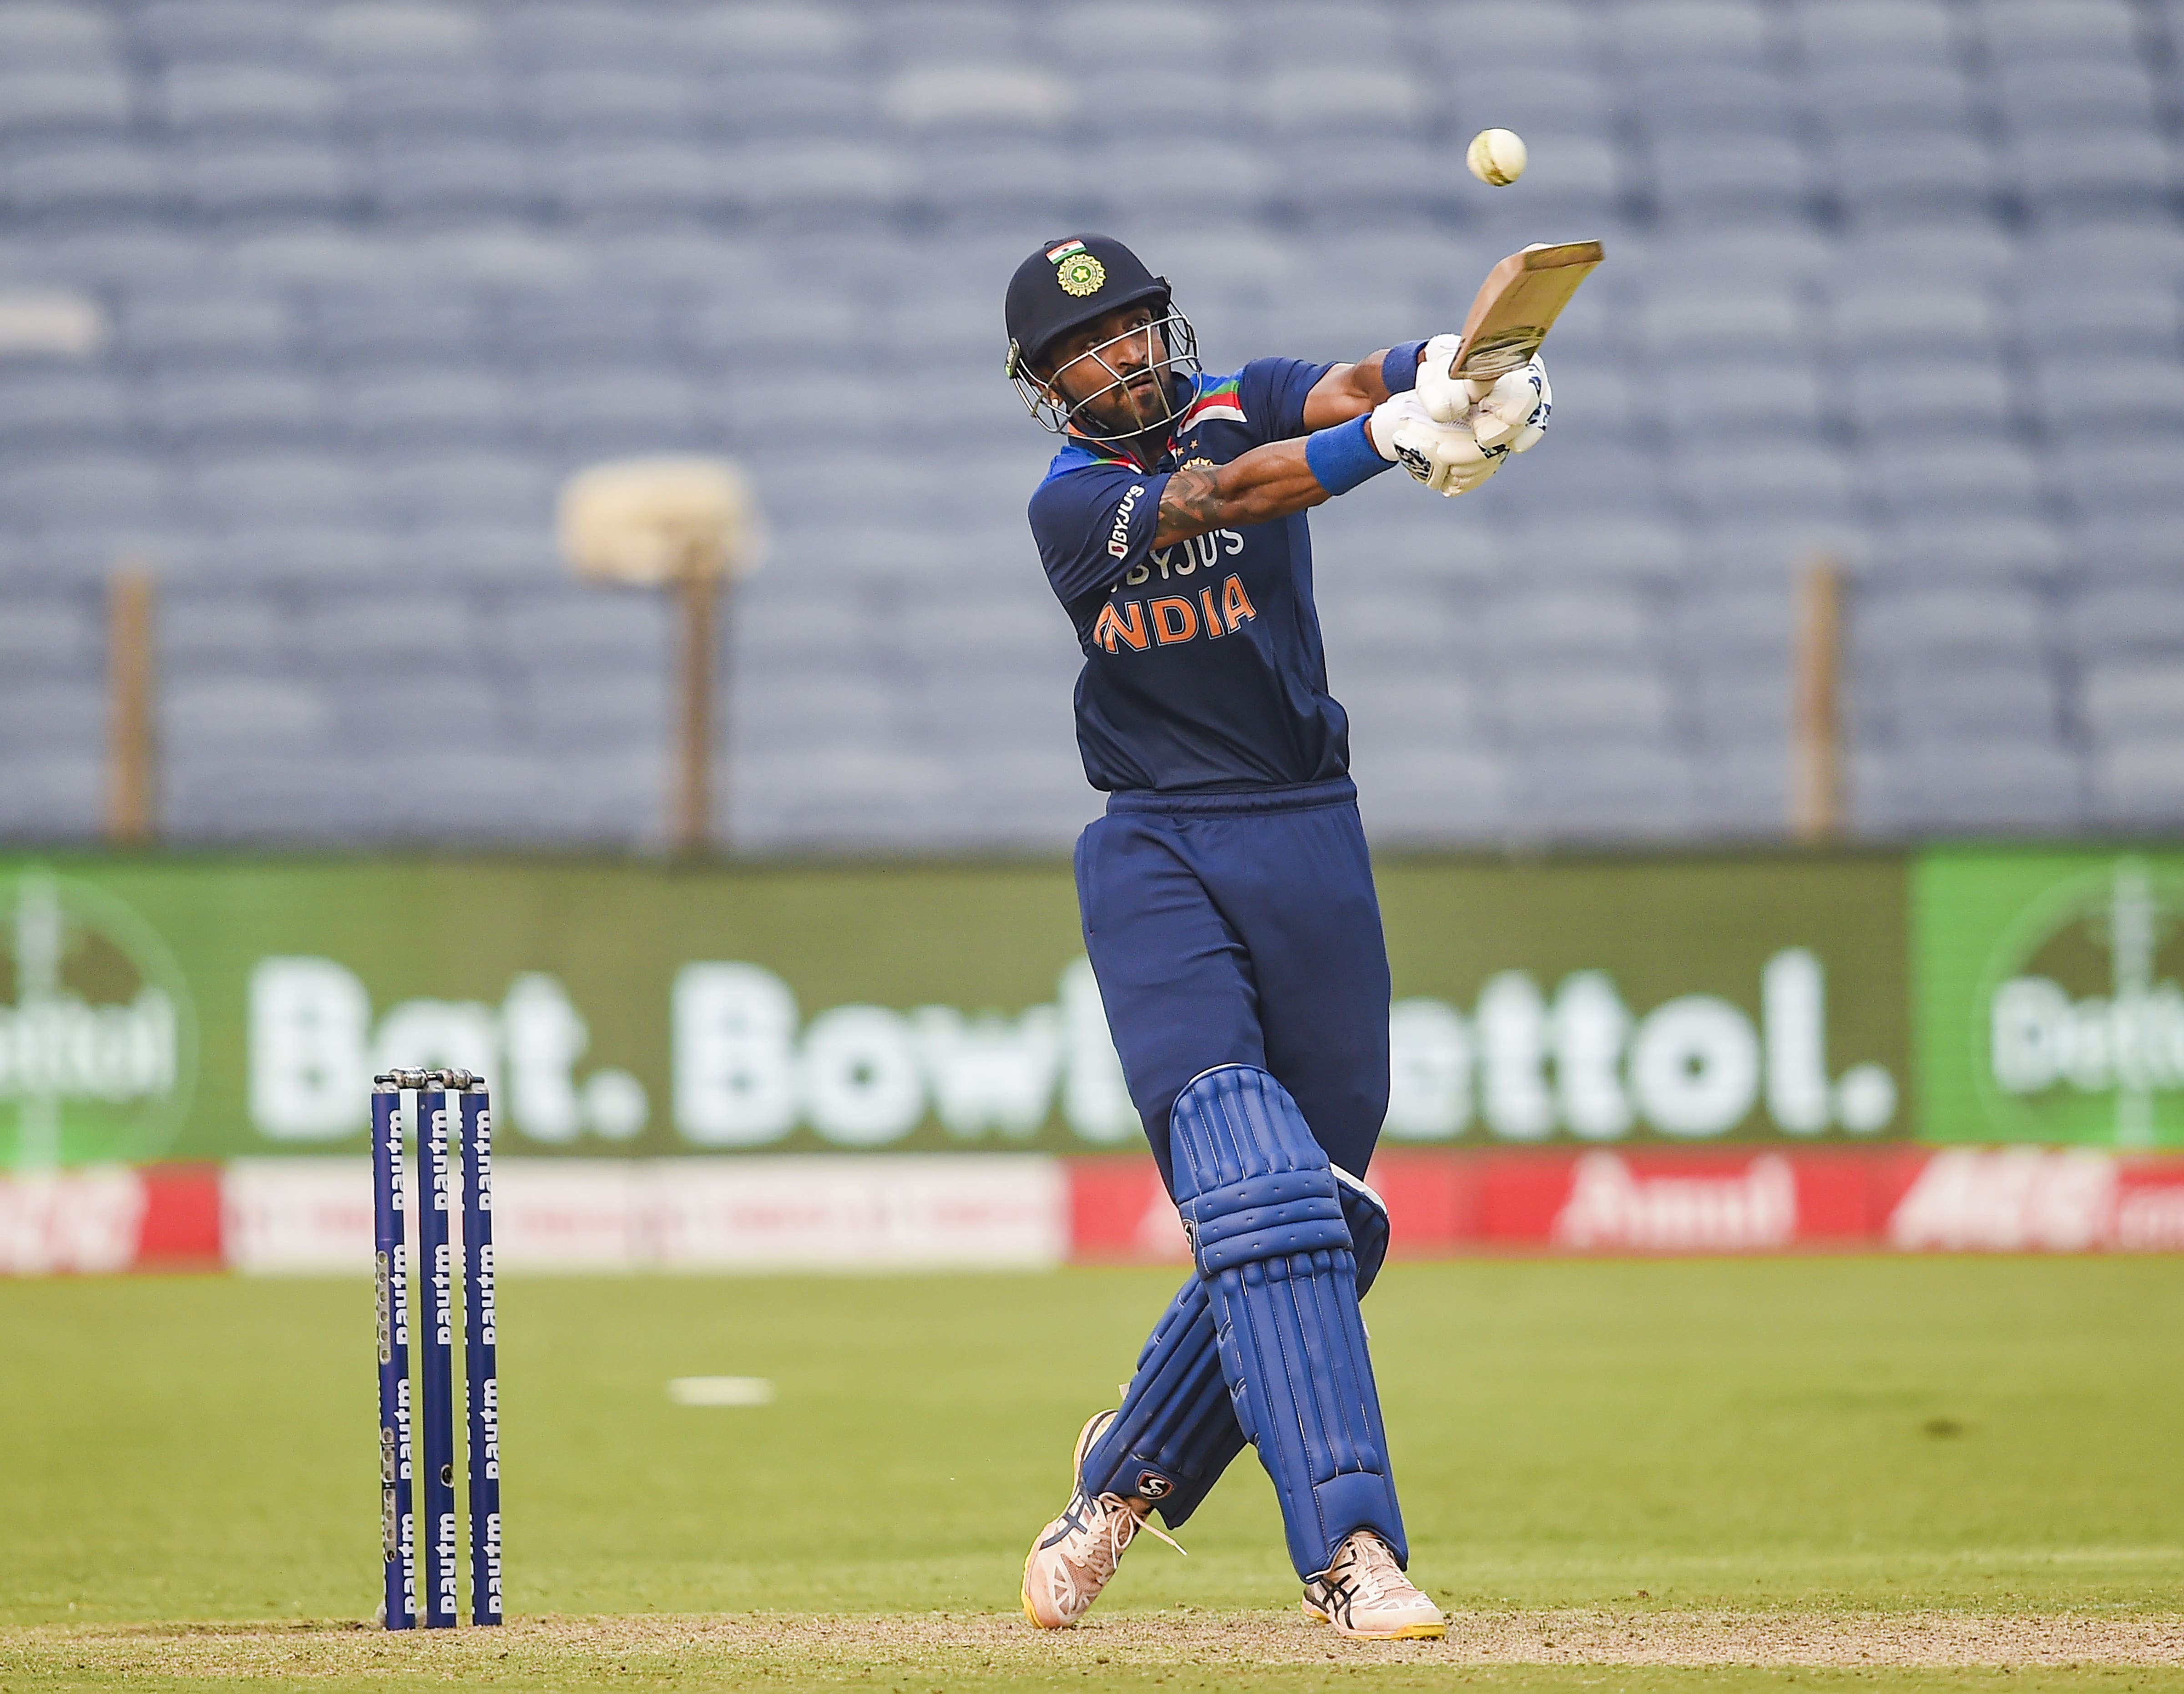 Krunal Pandya en route to scoring a whirlwind fifty against England in the first ODI in Pune. (Photo: BCCI)